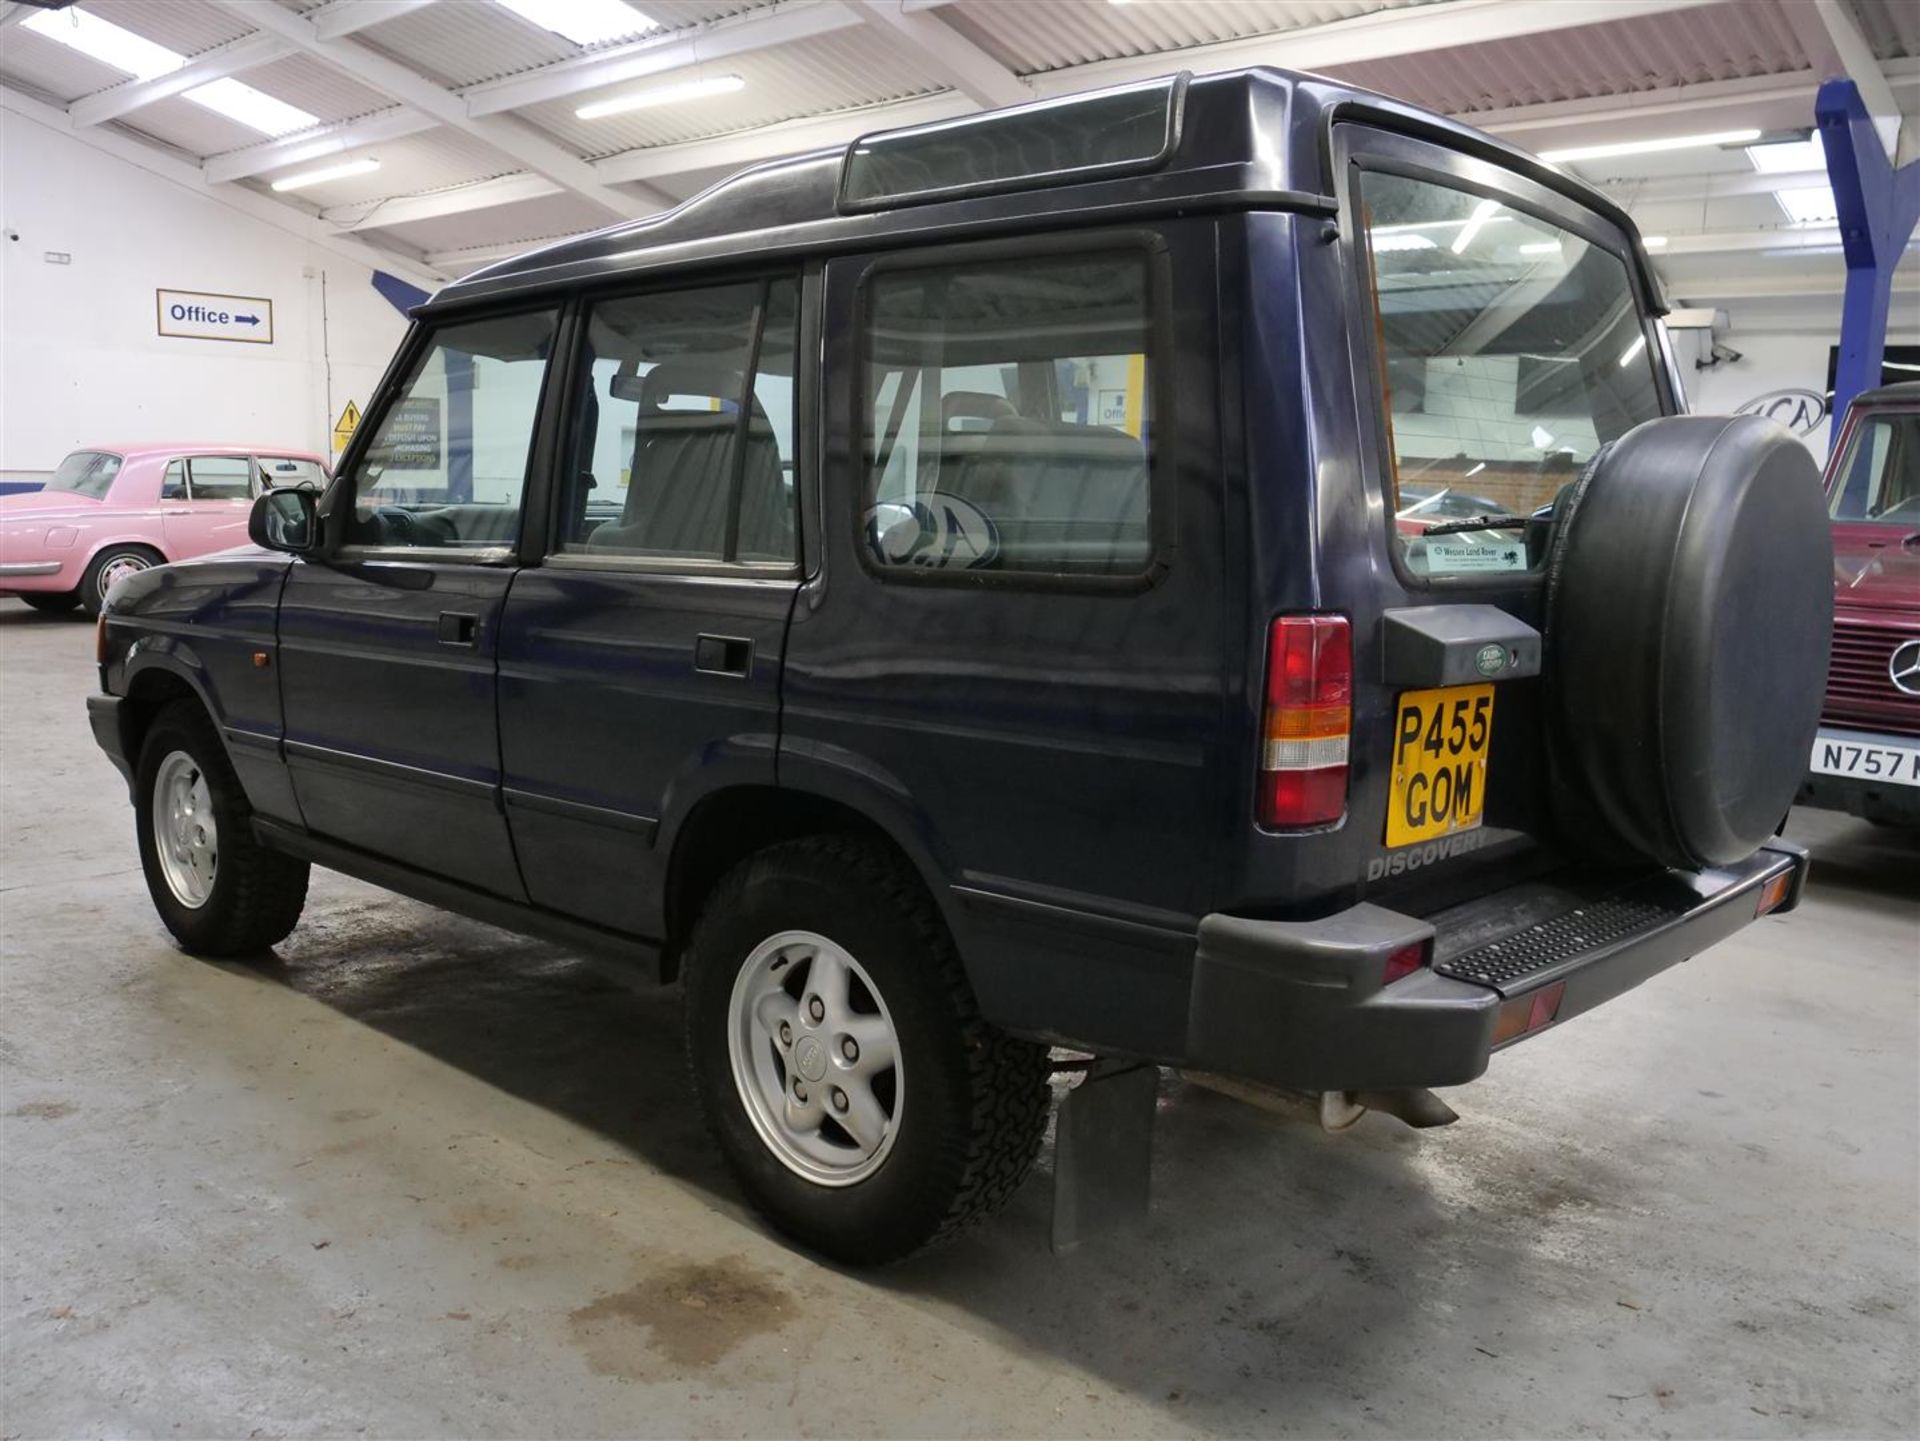 1996 Land Rover Discovery 2.5 TDI - Image 4 of 30